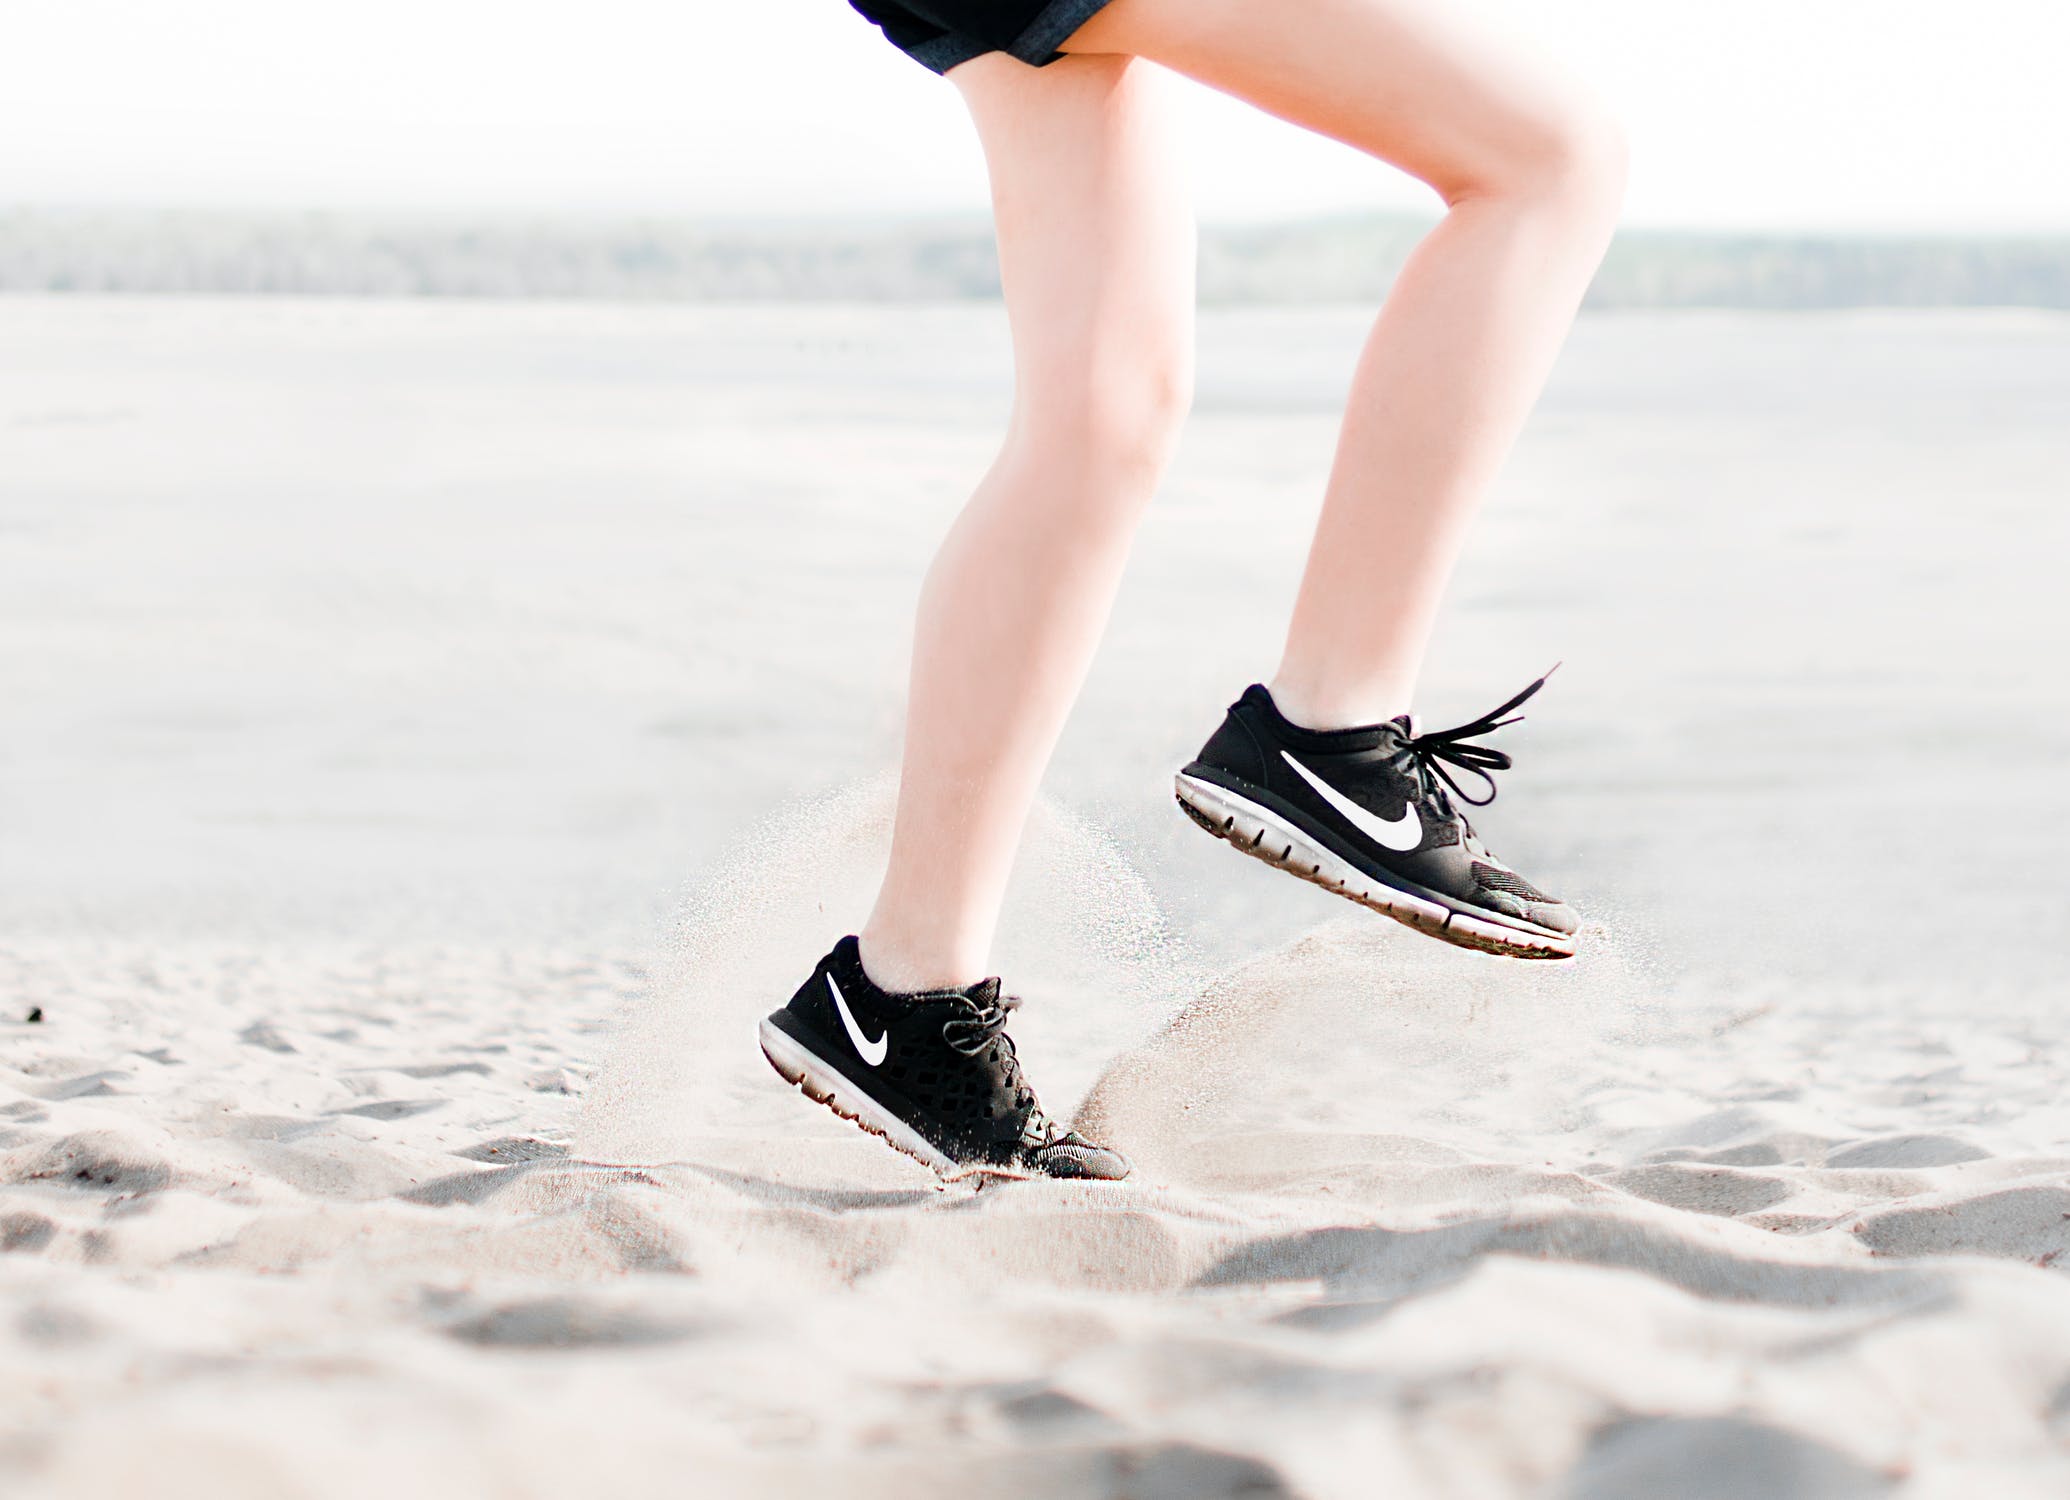 5 Common Mid-run Problems and How To Solve Them